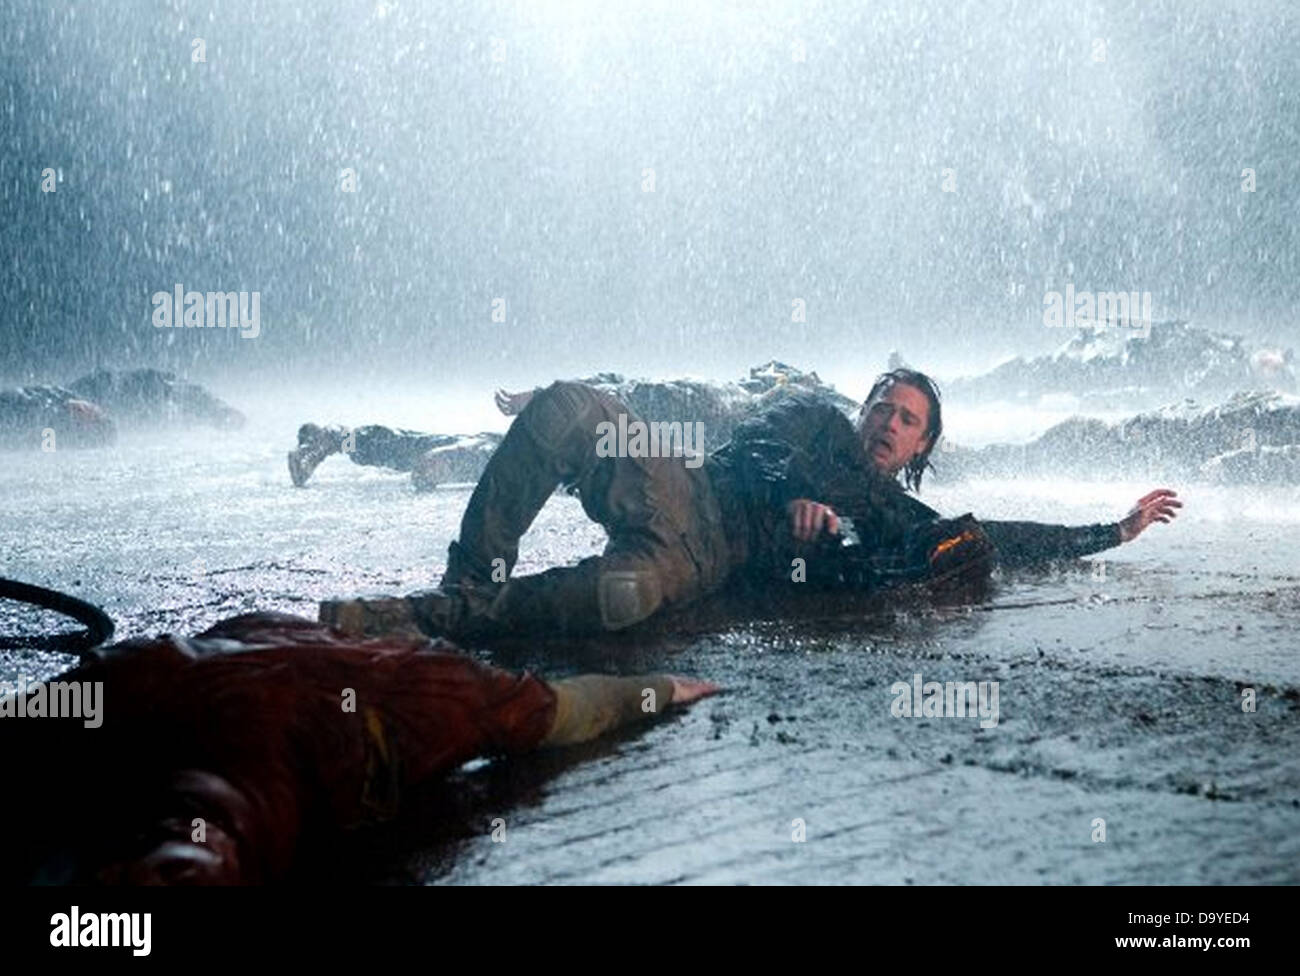 WORLD WAR Z 2013 Paramount Pictures film with Brad Pitt Stock Photo